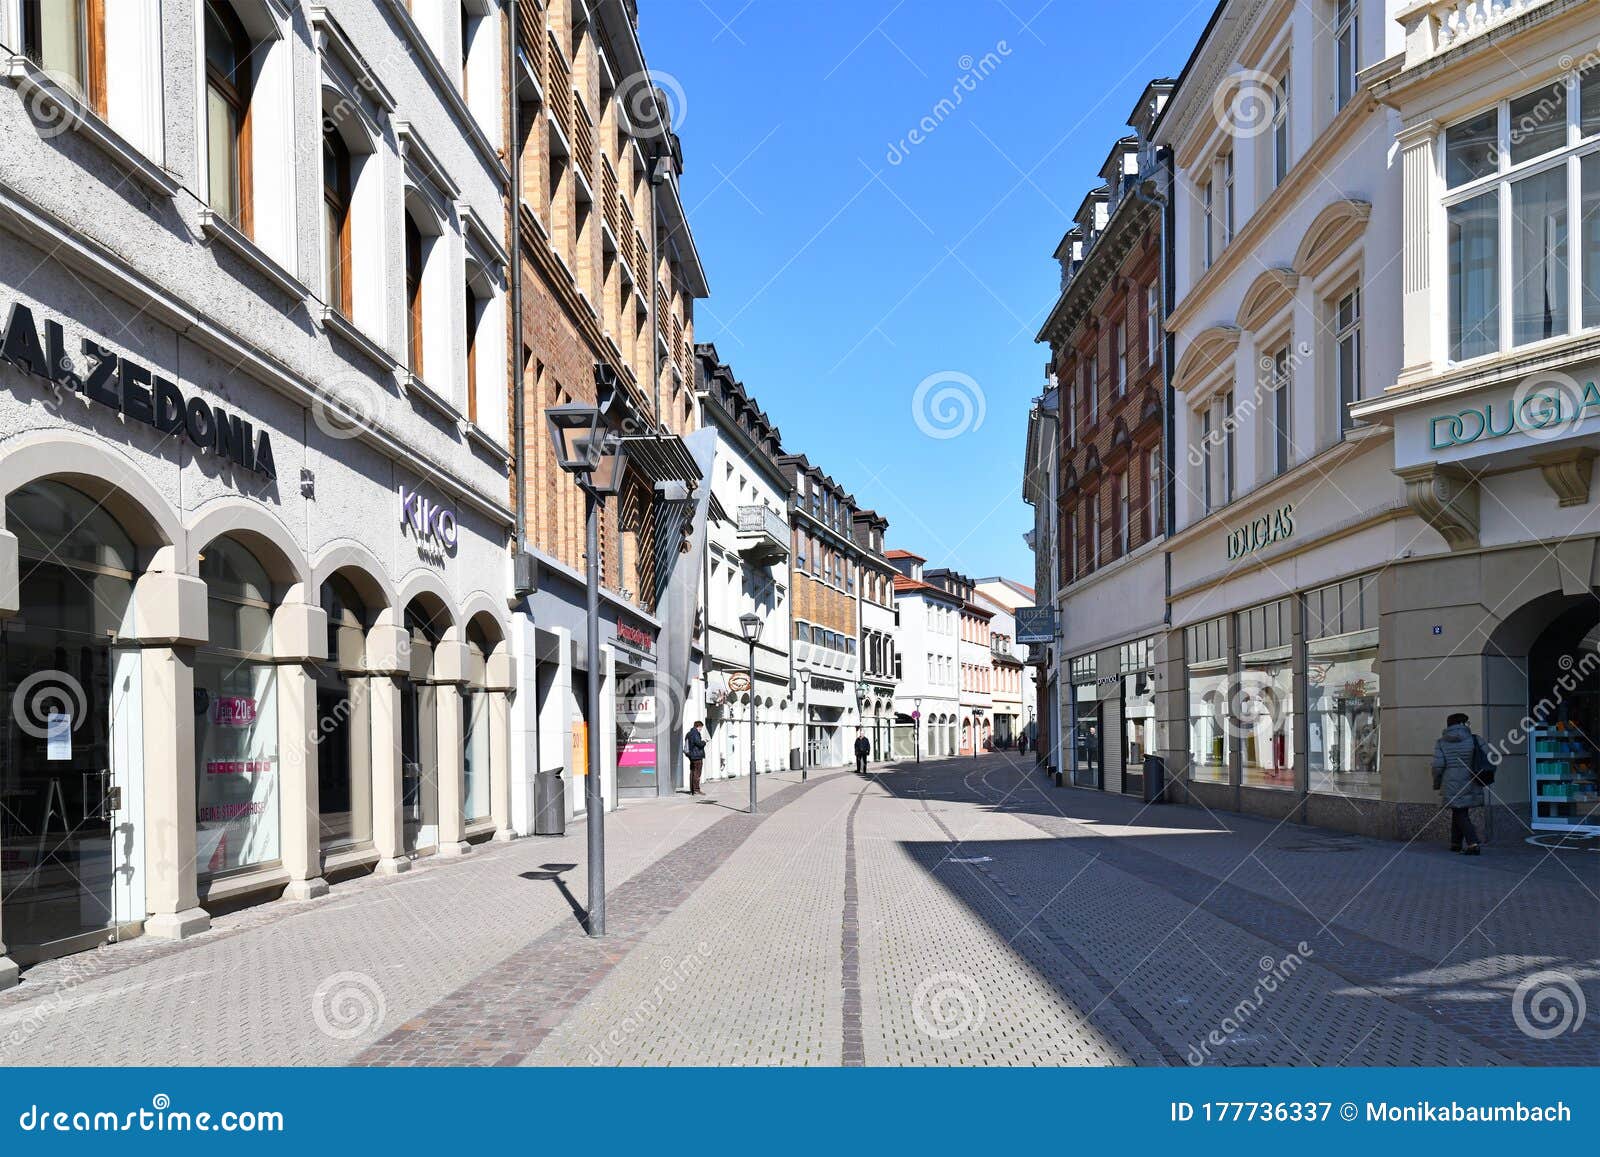 Heidelberg, Germany, almost Empty City Center with Shopping Street with Closed  Shops during Corona Virus Lockdown Editorial Photography - Image of corona,  economy: 177736337